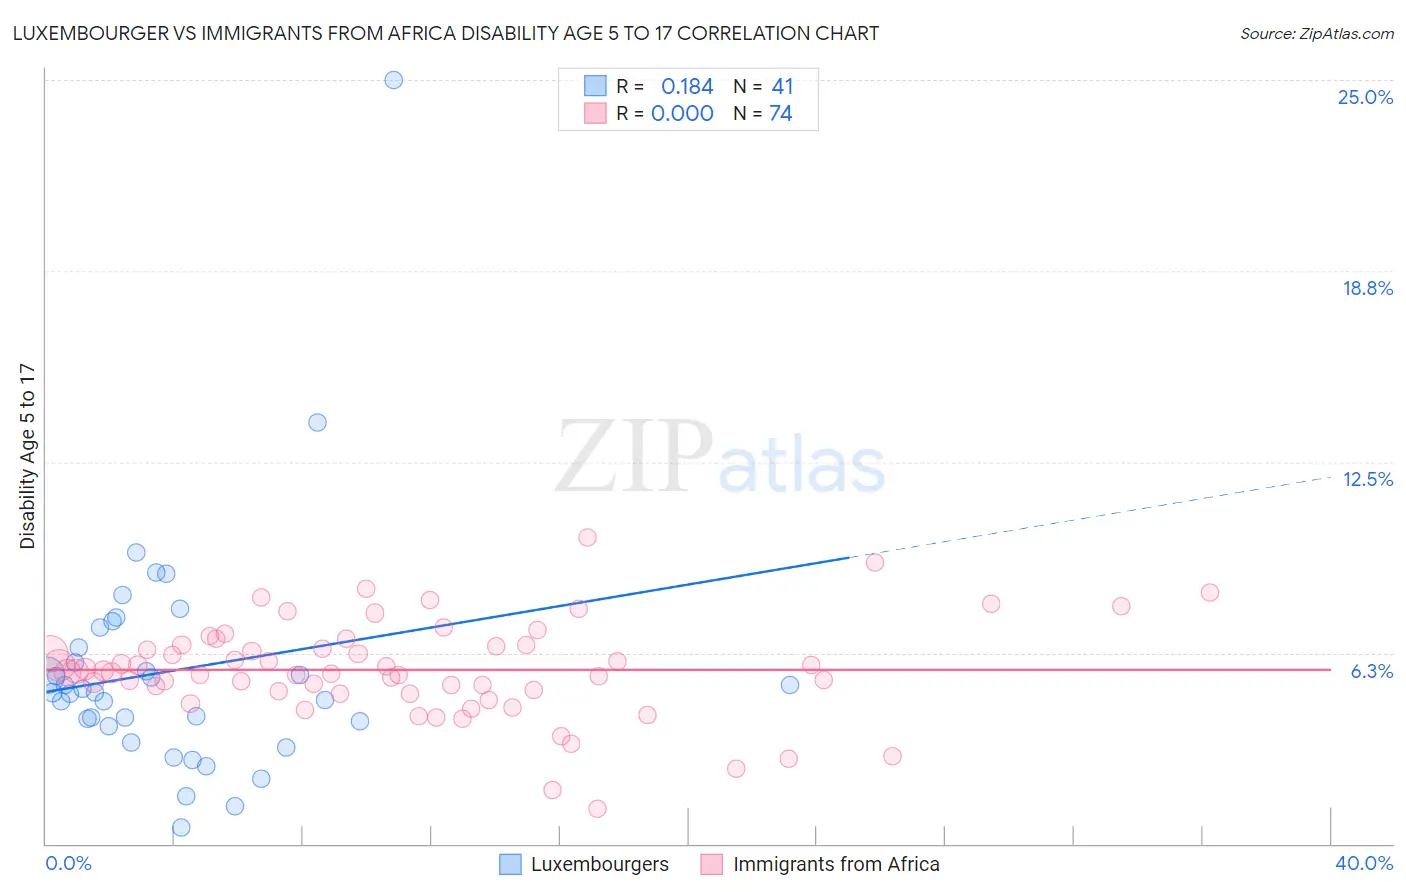 Luxembourger vs Immigrants from Africa Disability Age 5 to 17